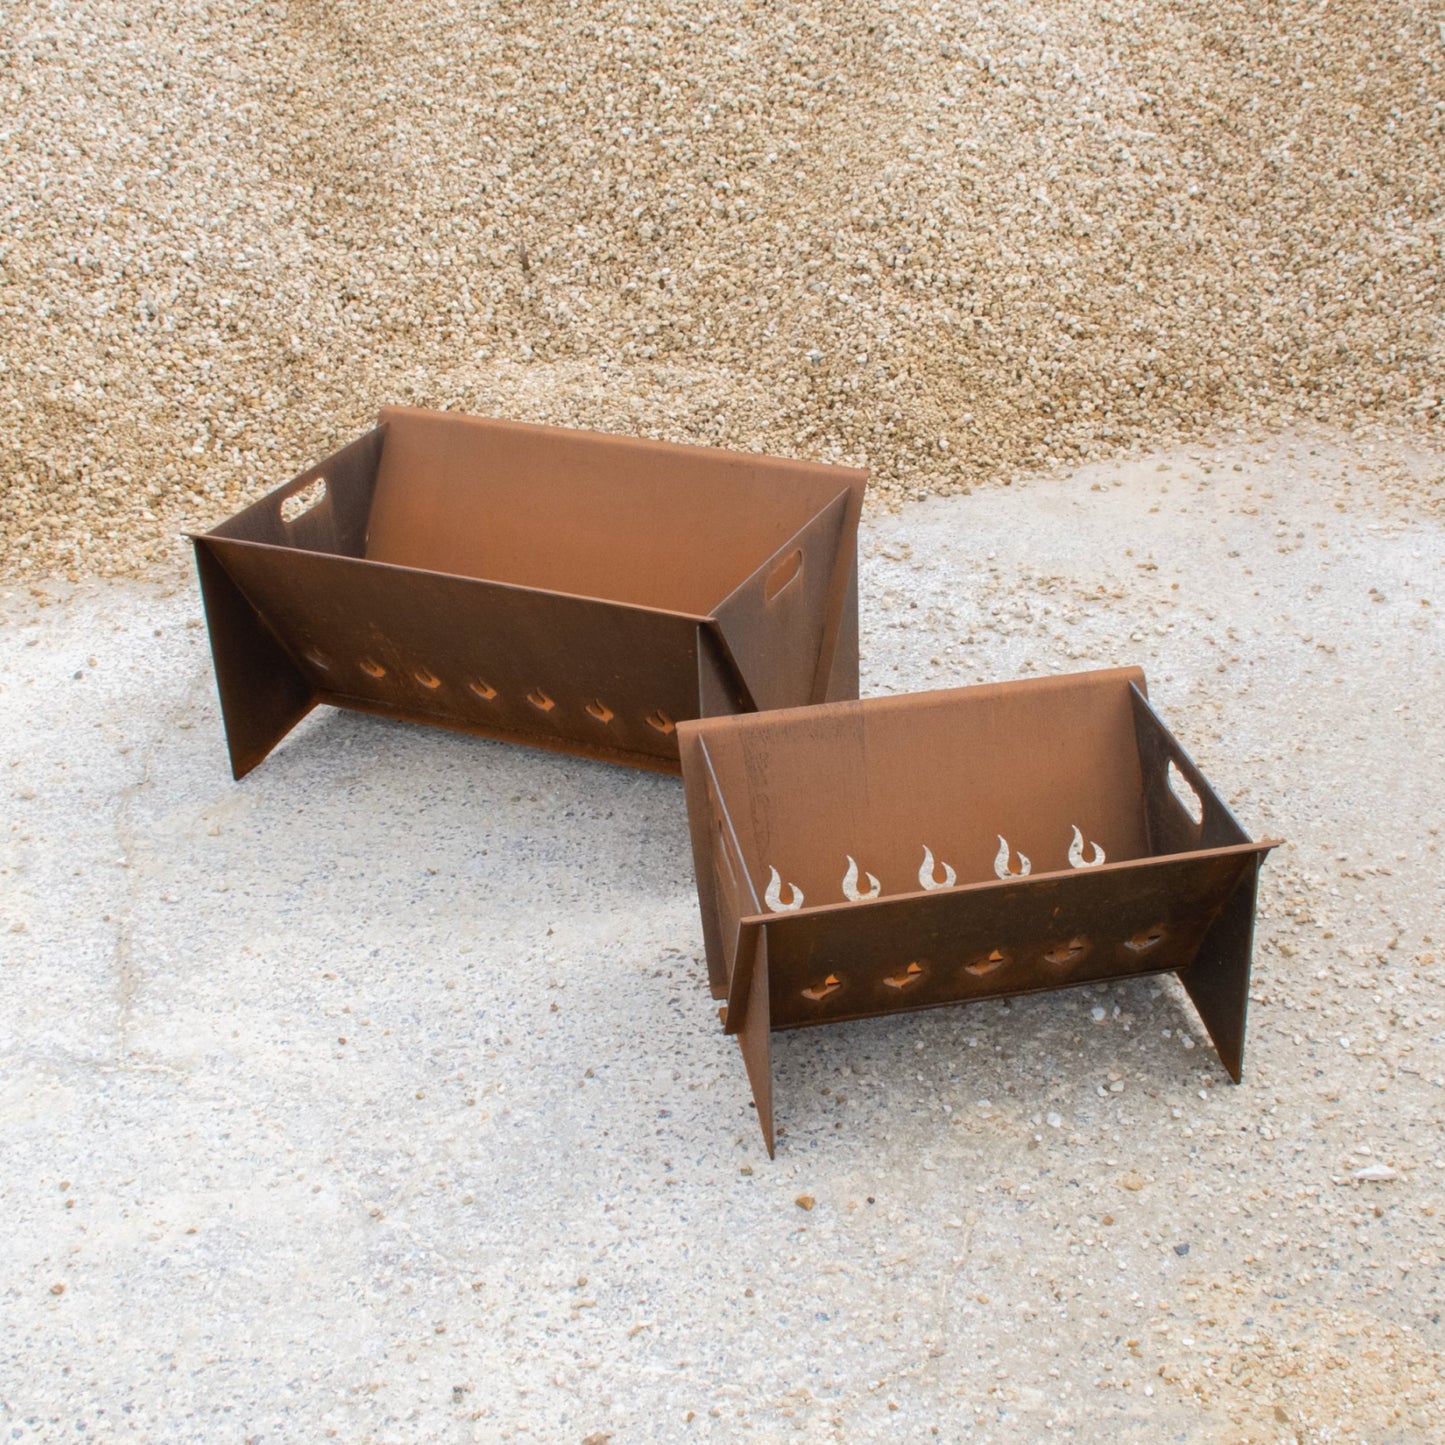 Collapsible fire pits